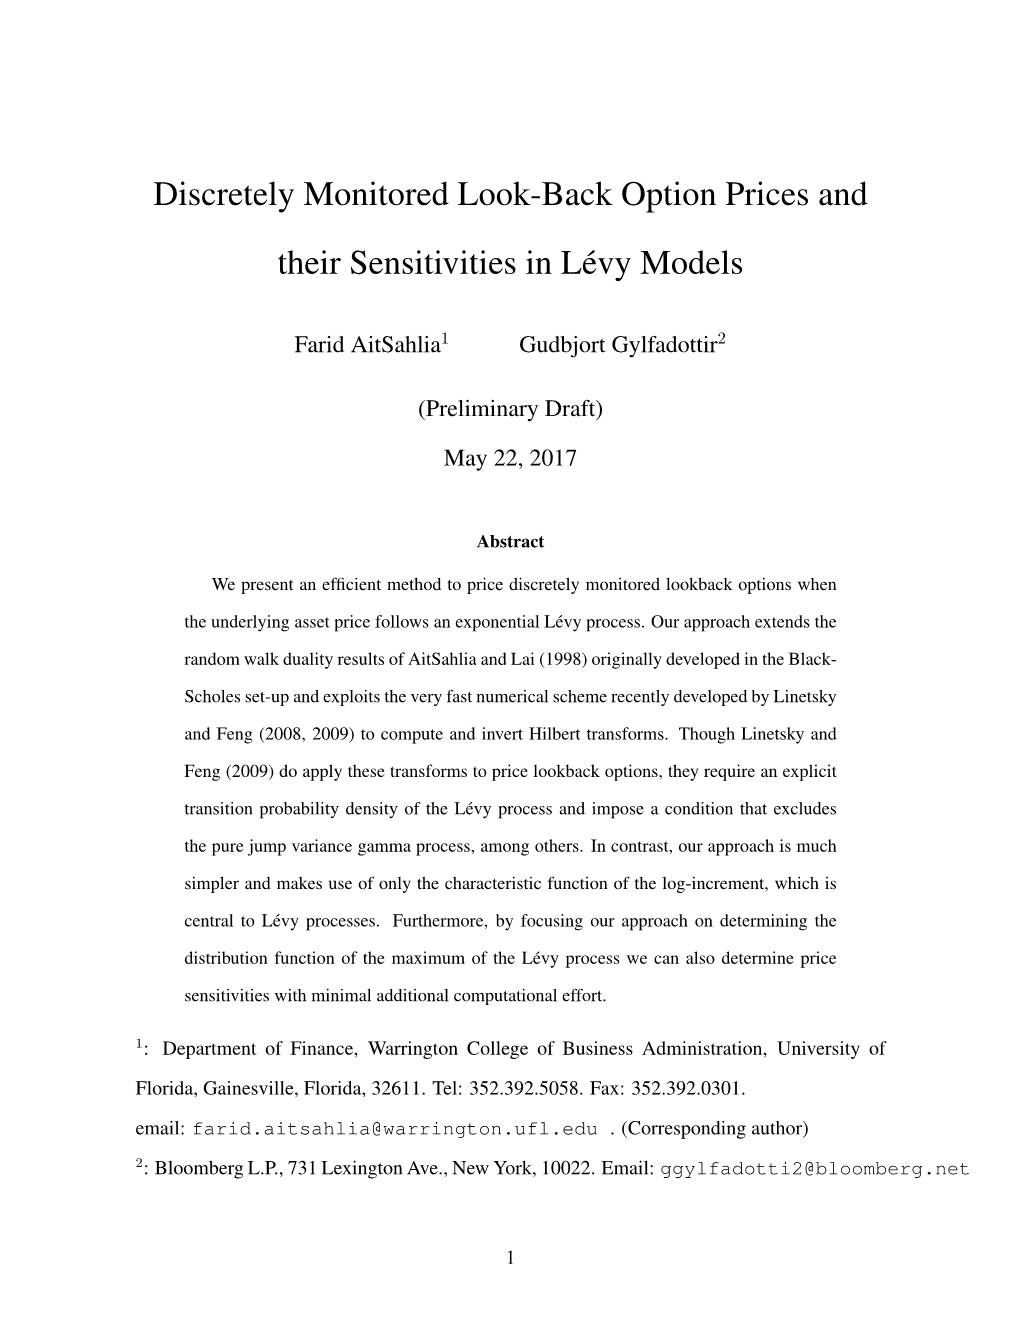 Discretely Monitored Look-Back Option Prices and Their Sensitivities in Levy´ Models